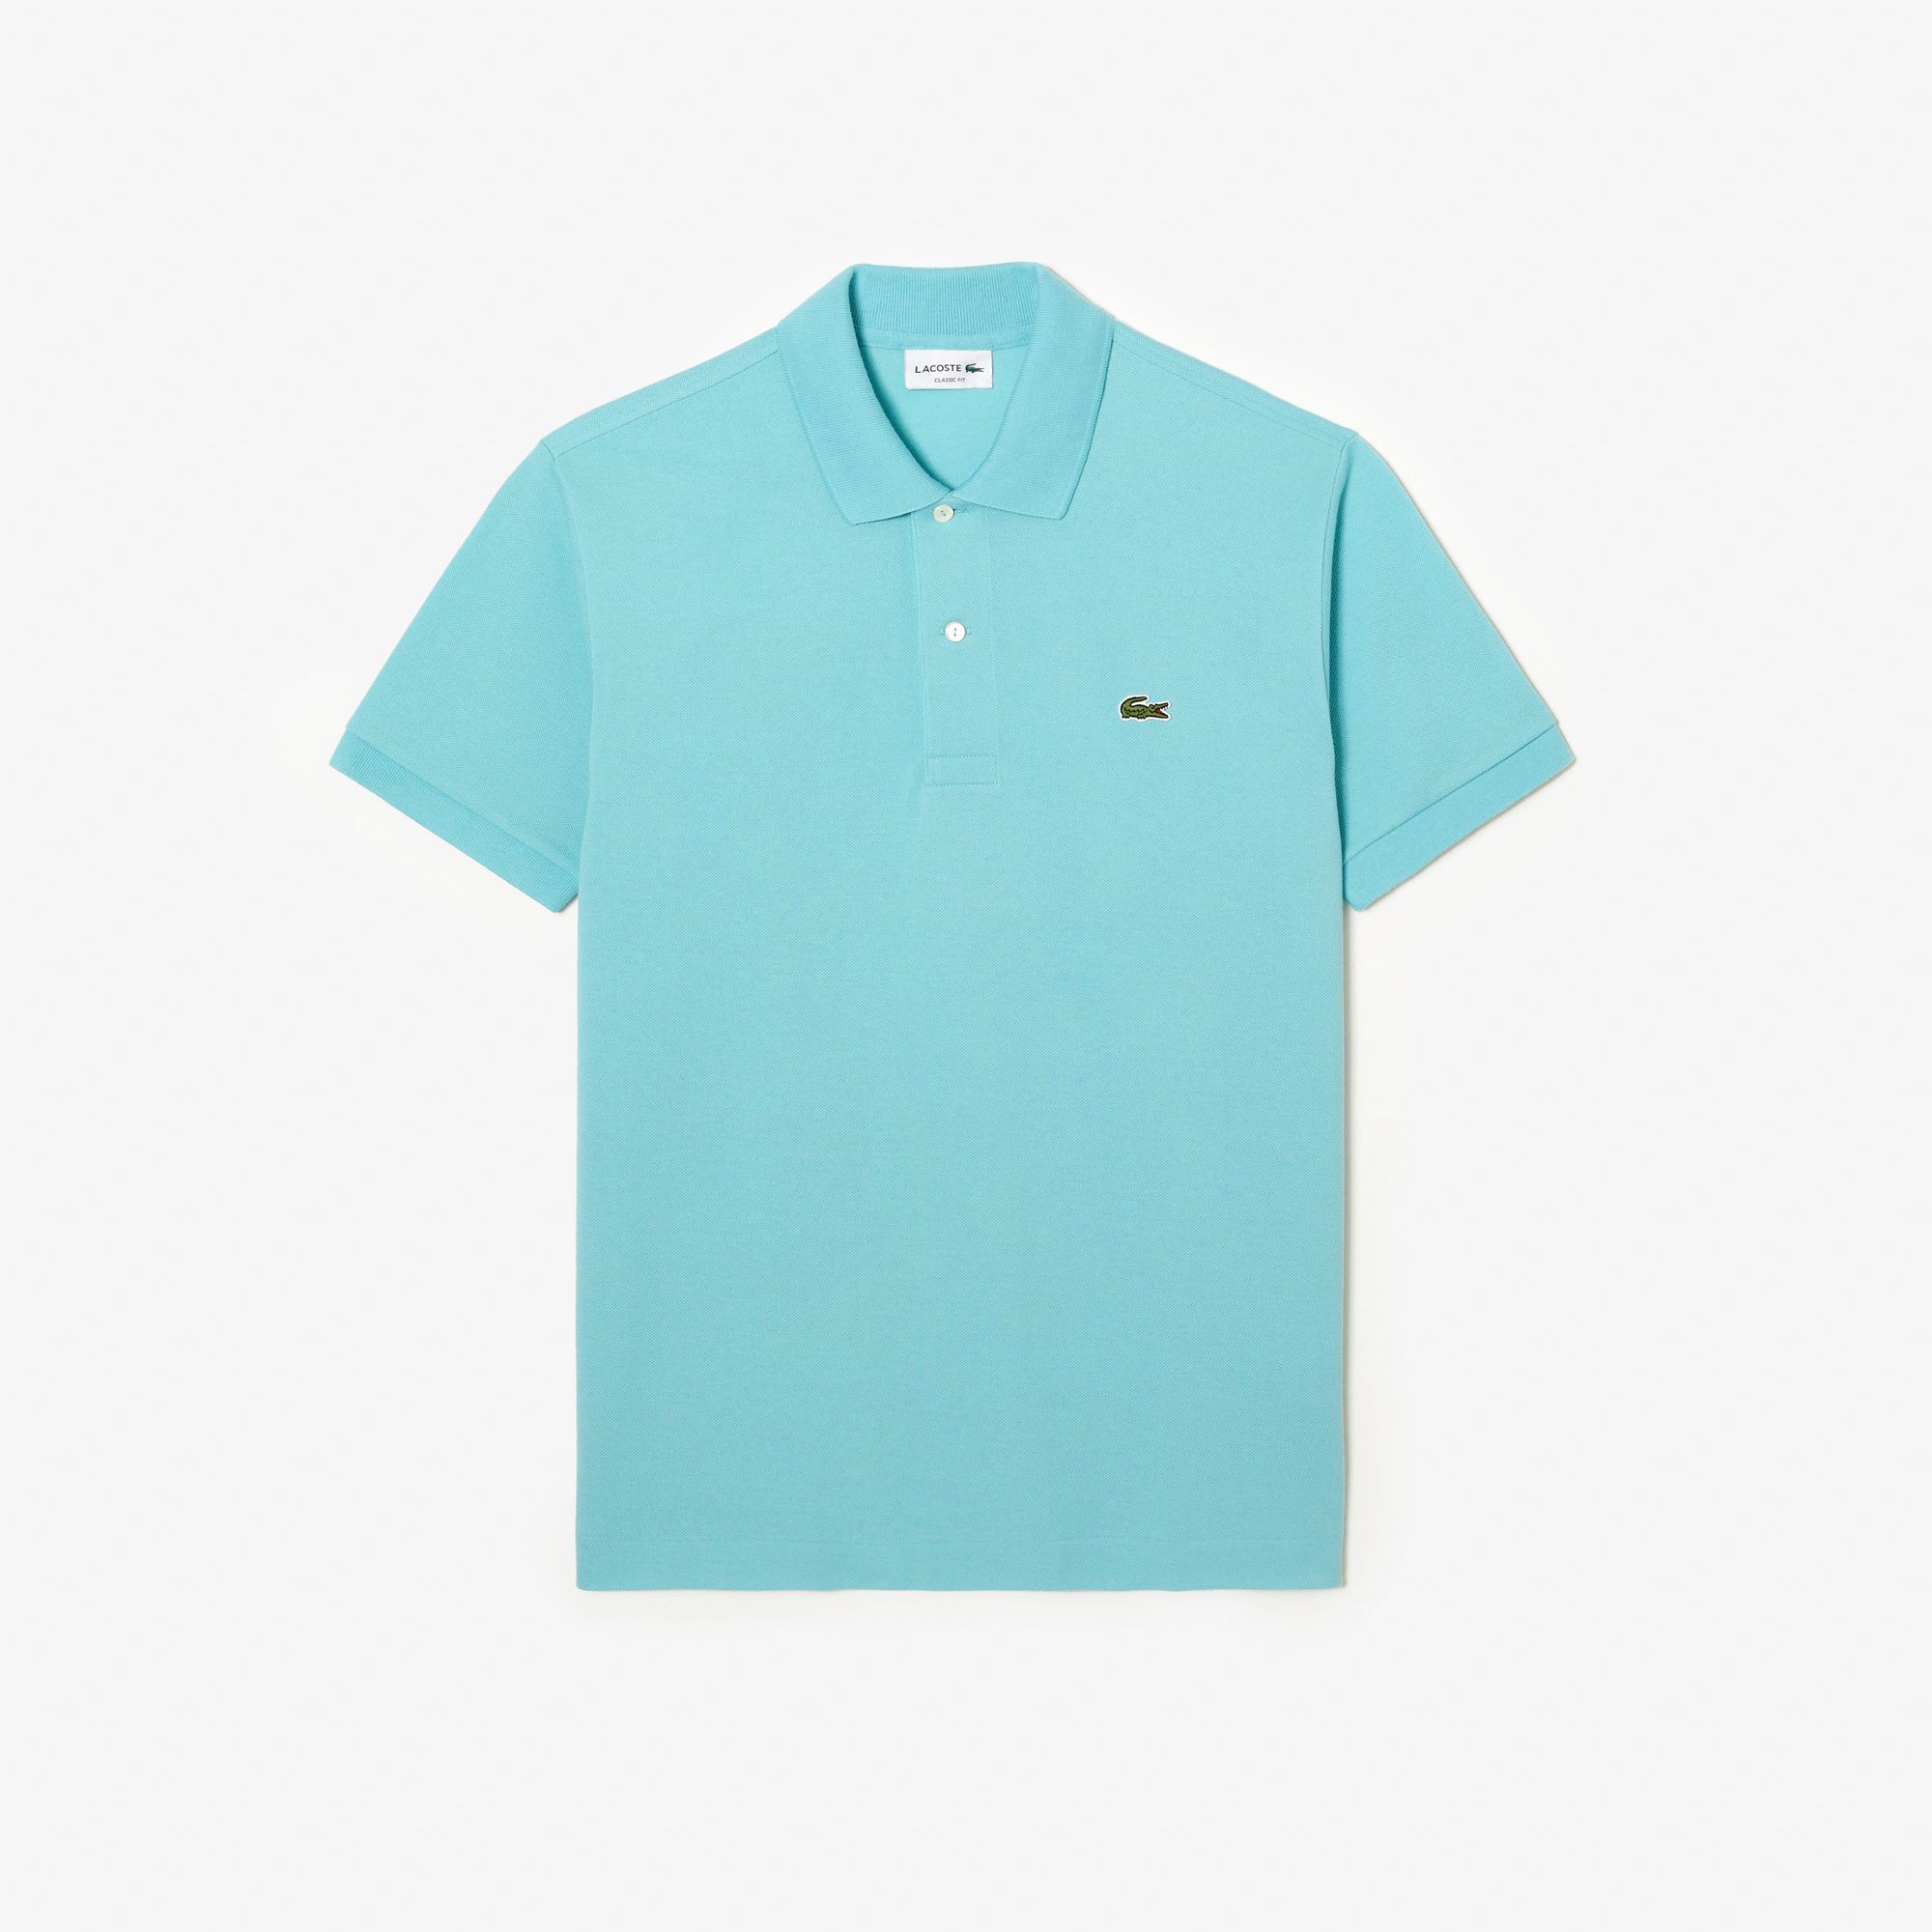  Lacoste Classic Fit L.12.12 Polo - Light Turquoise 